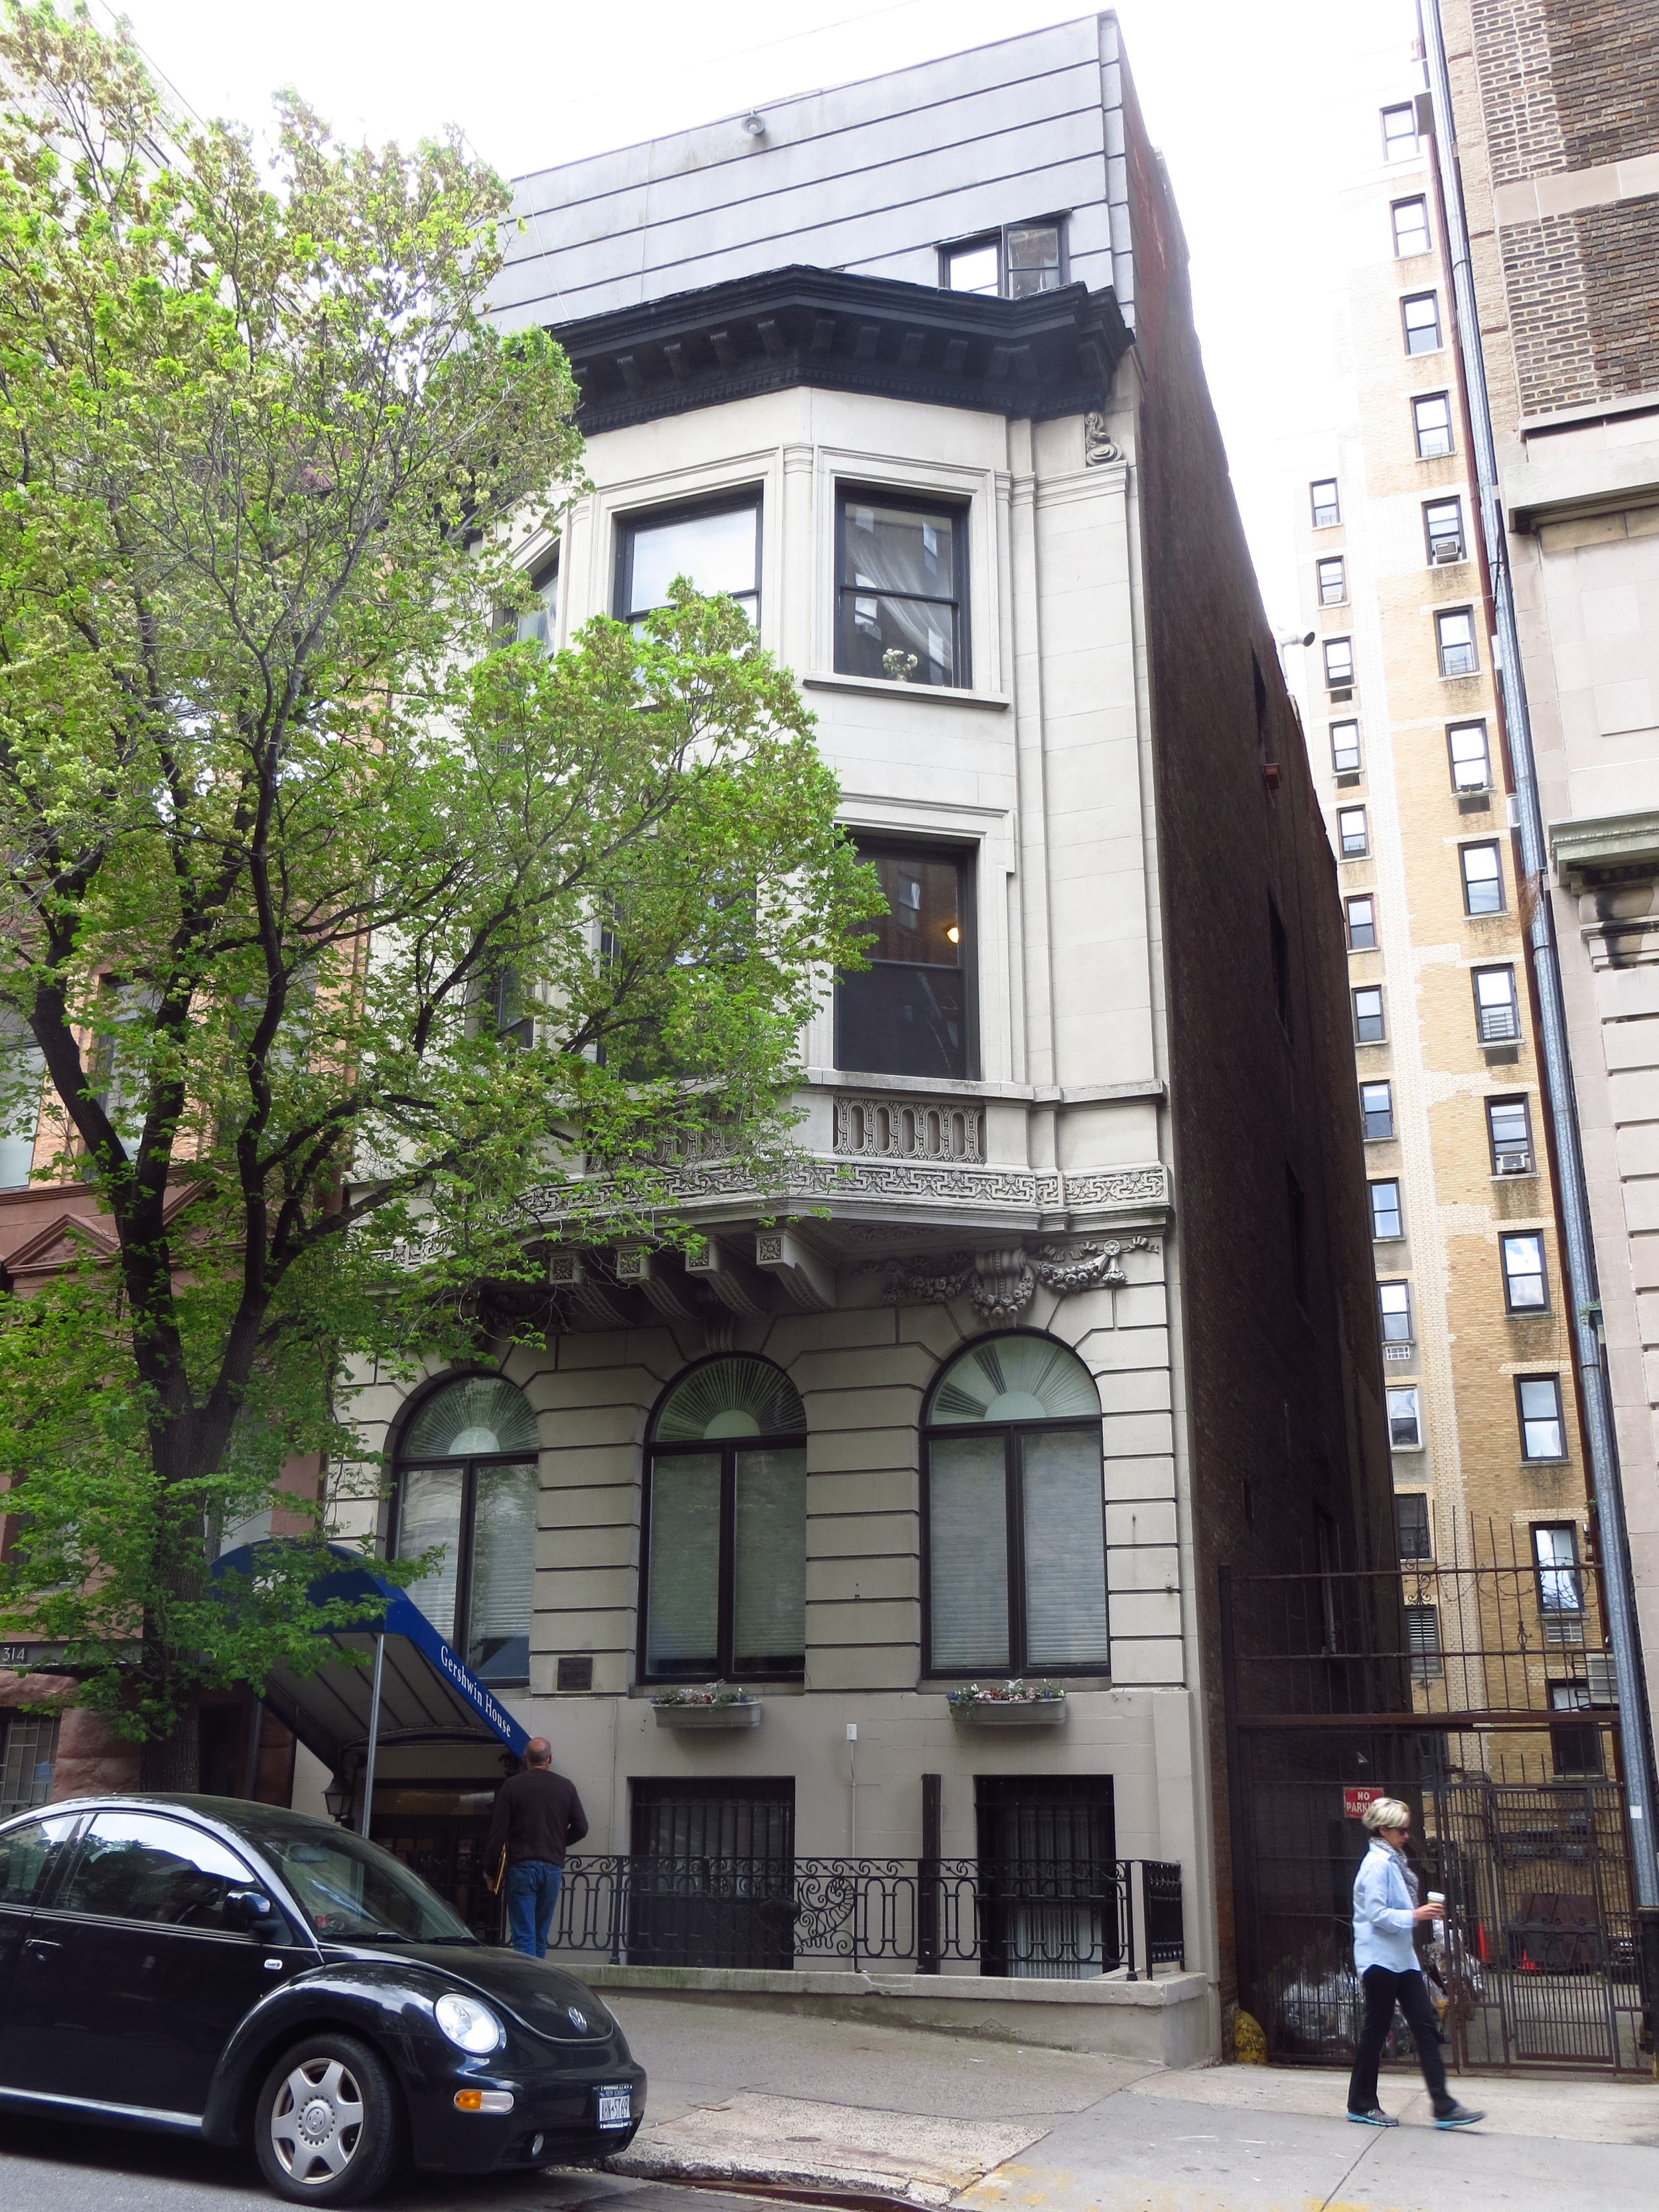 Another Gershwin house